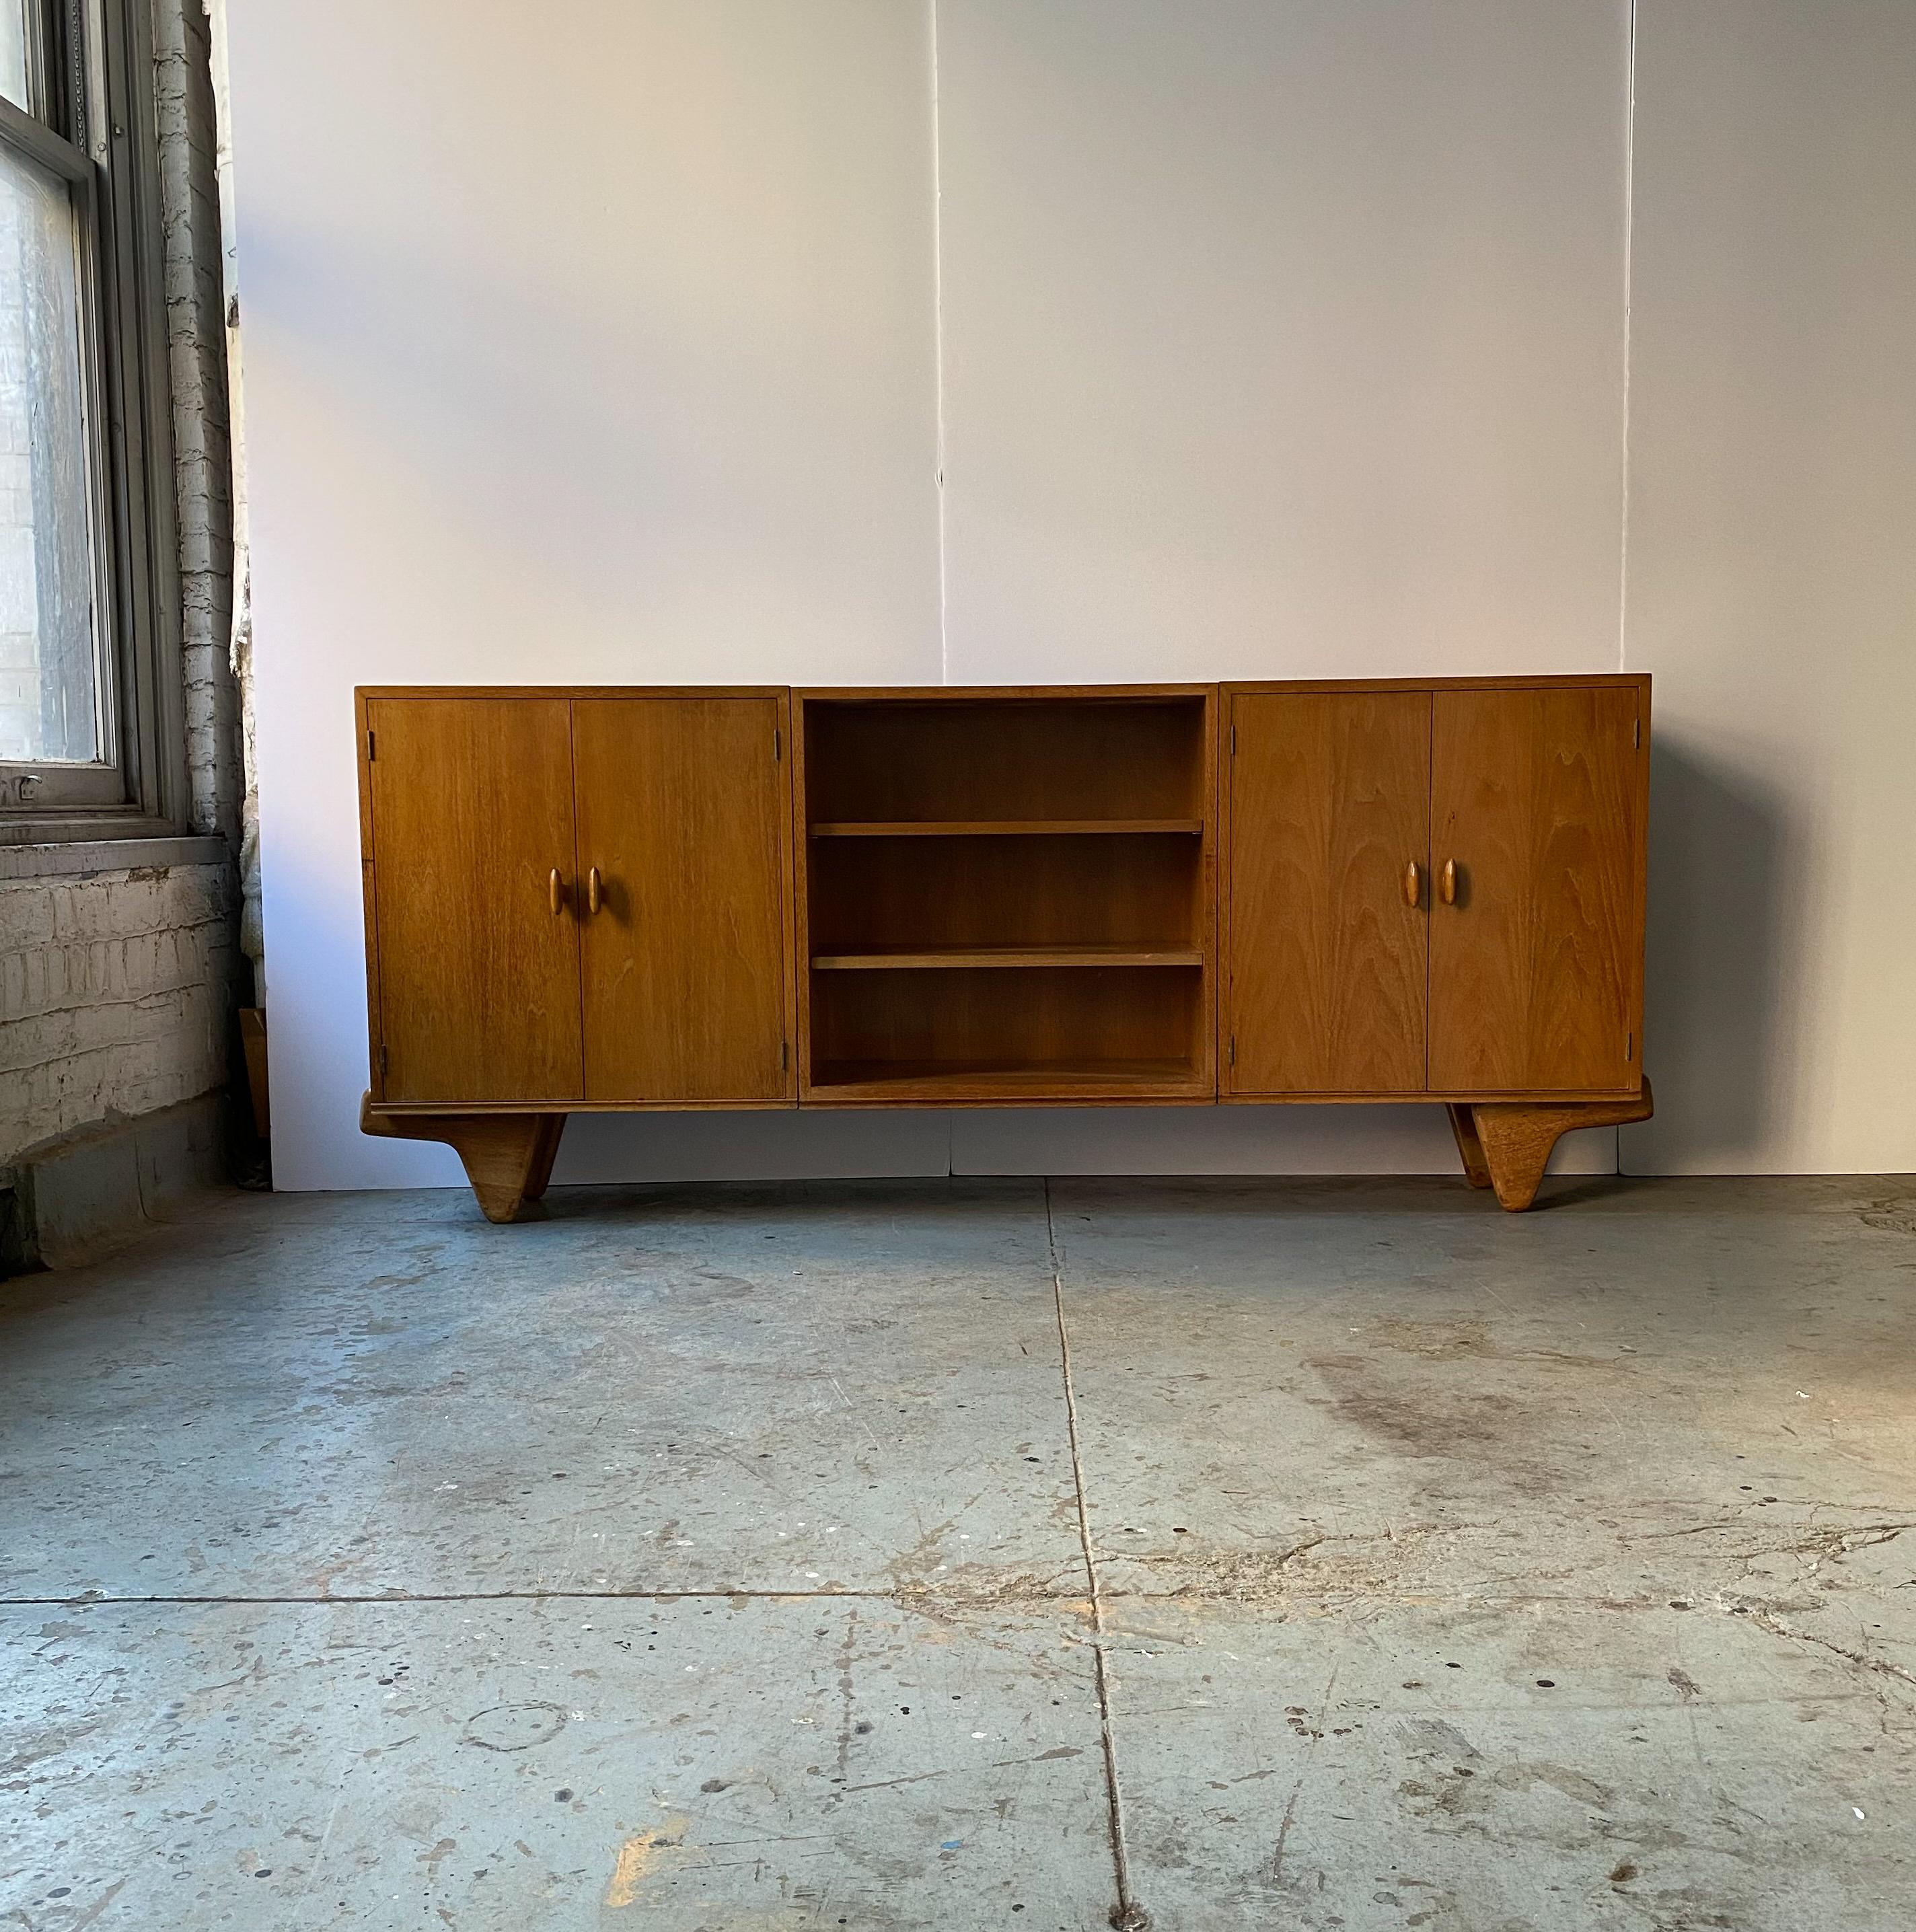 Modular unit cabinet in silvered walnut by the team of German-born American architects Oscar Stonorov and Willo von Moltke, designed for the Museum of Modern Art's 1941 Organic Design in Home Furnishings competition, and produced in very small